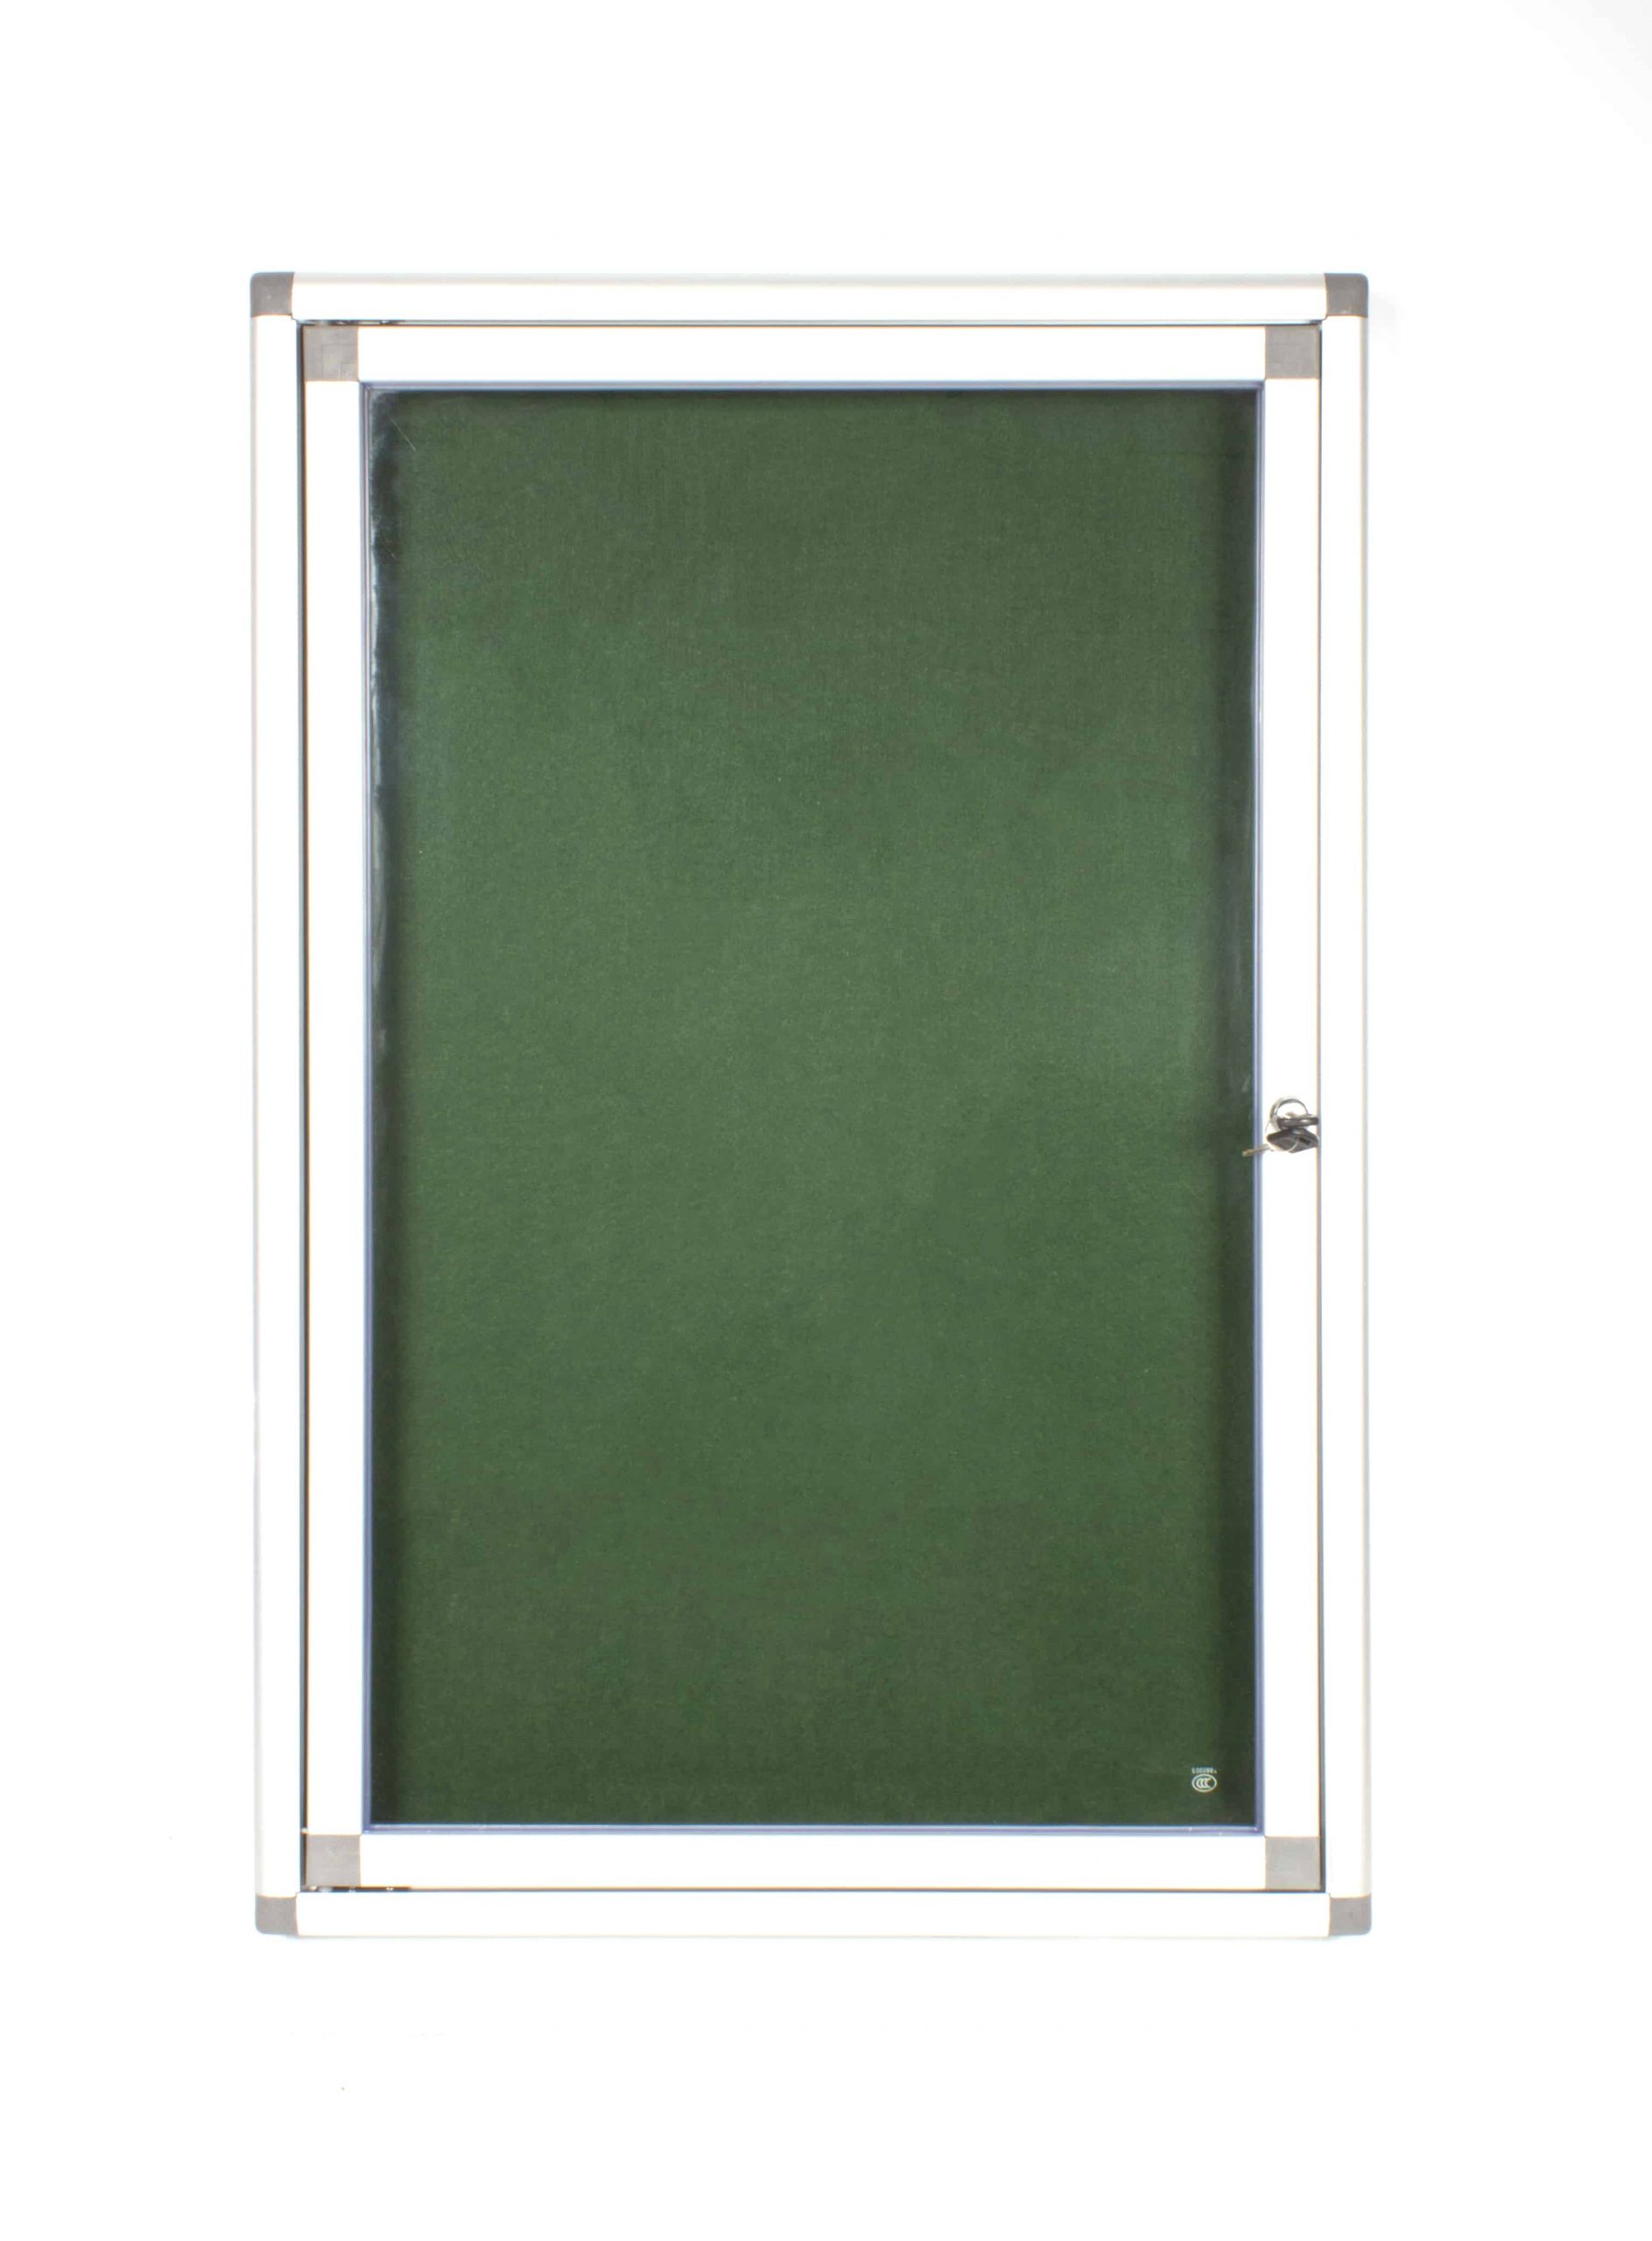 Display Case Pinning Hinge 900*600mm Green - Park Avenue Stationers